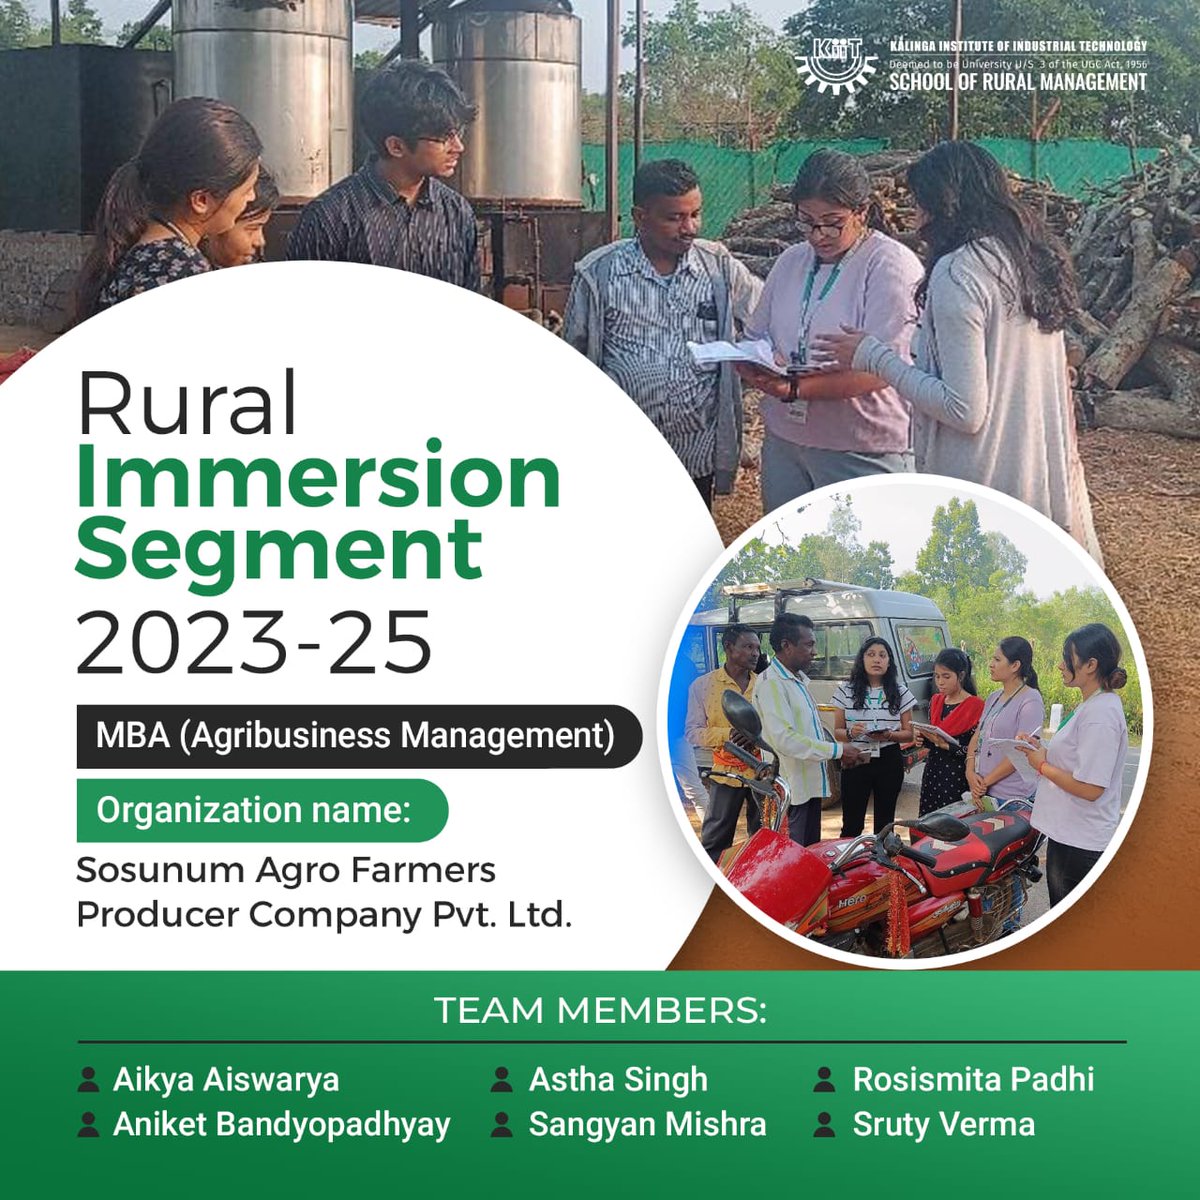 The KSRM Rural Immersion Program blends classroom learning with practical experiences using hands-on training. The experience allows students to gain and improve skills such as teamwork, communication and productivity. #ksrmbbsr #AgriBusinessManagement #ruralimmersionsegment